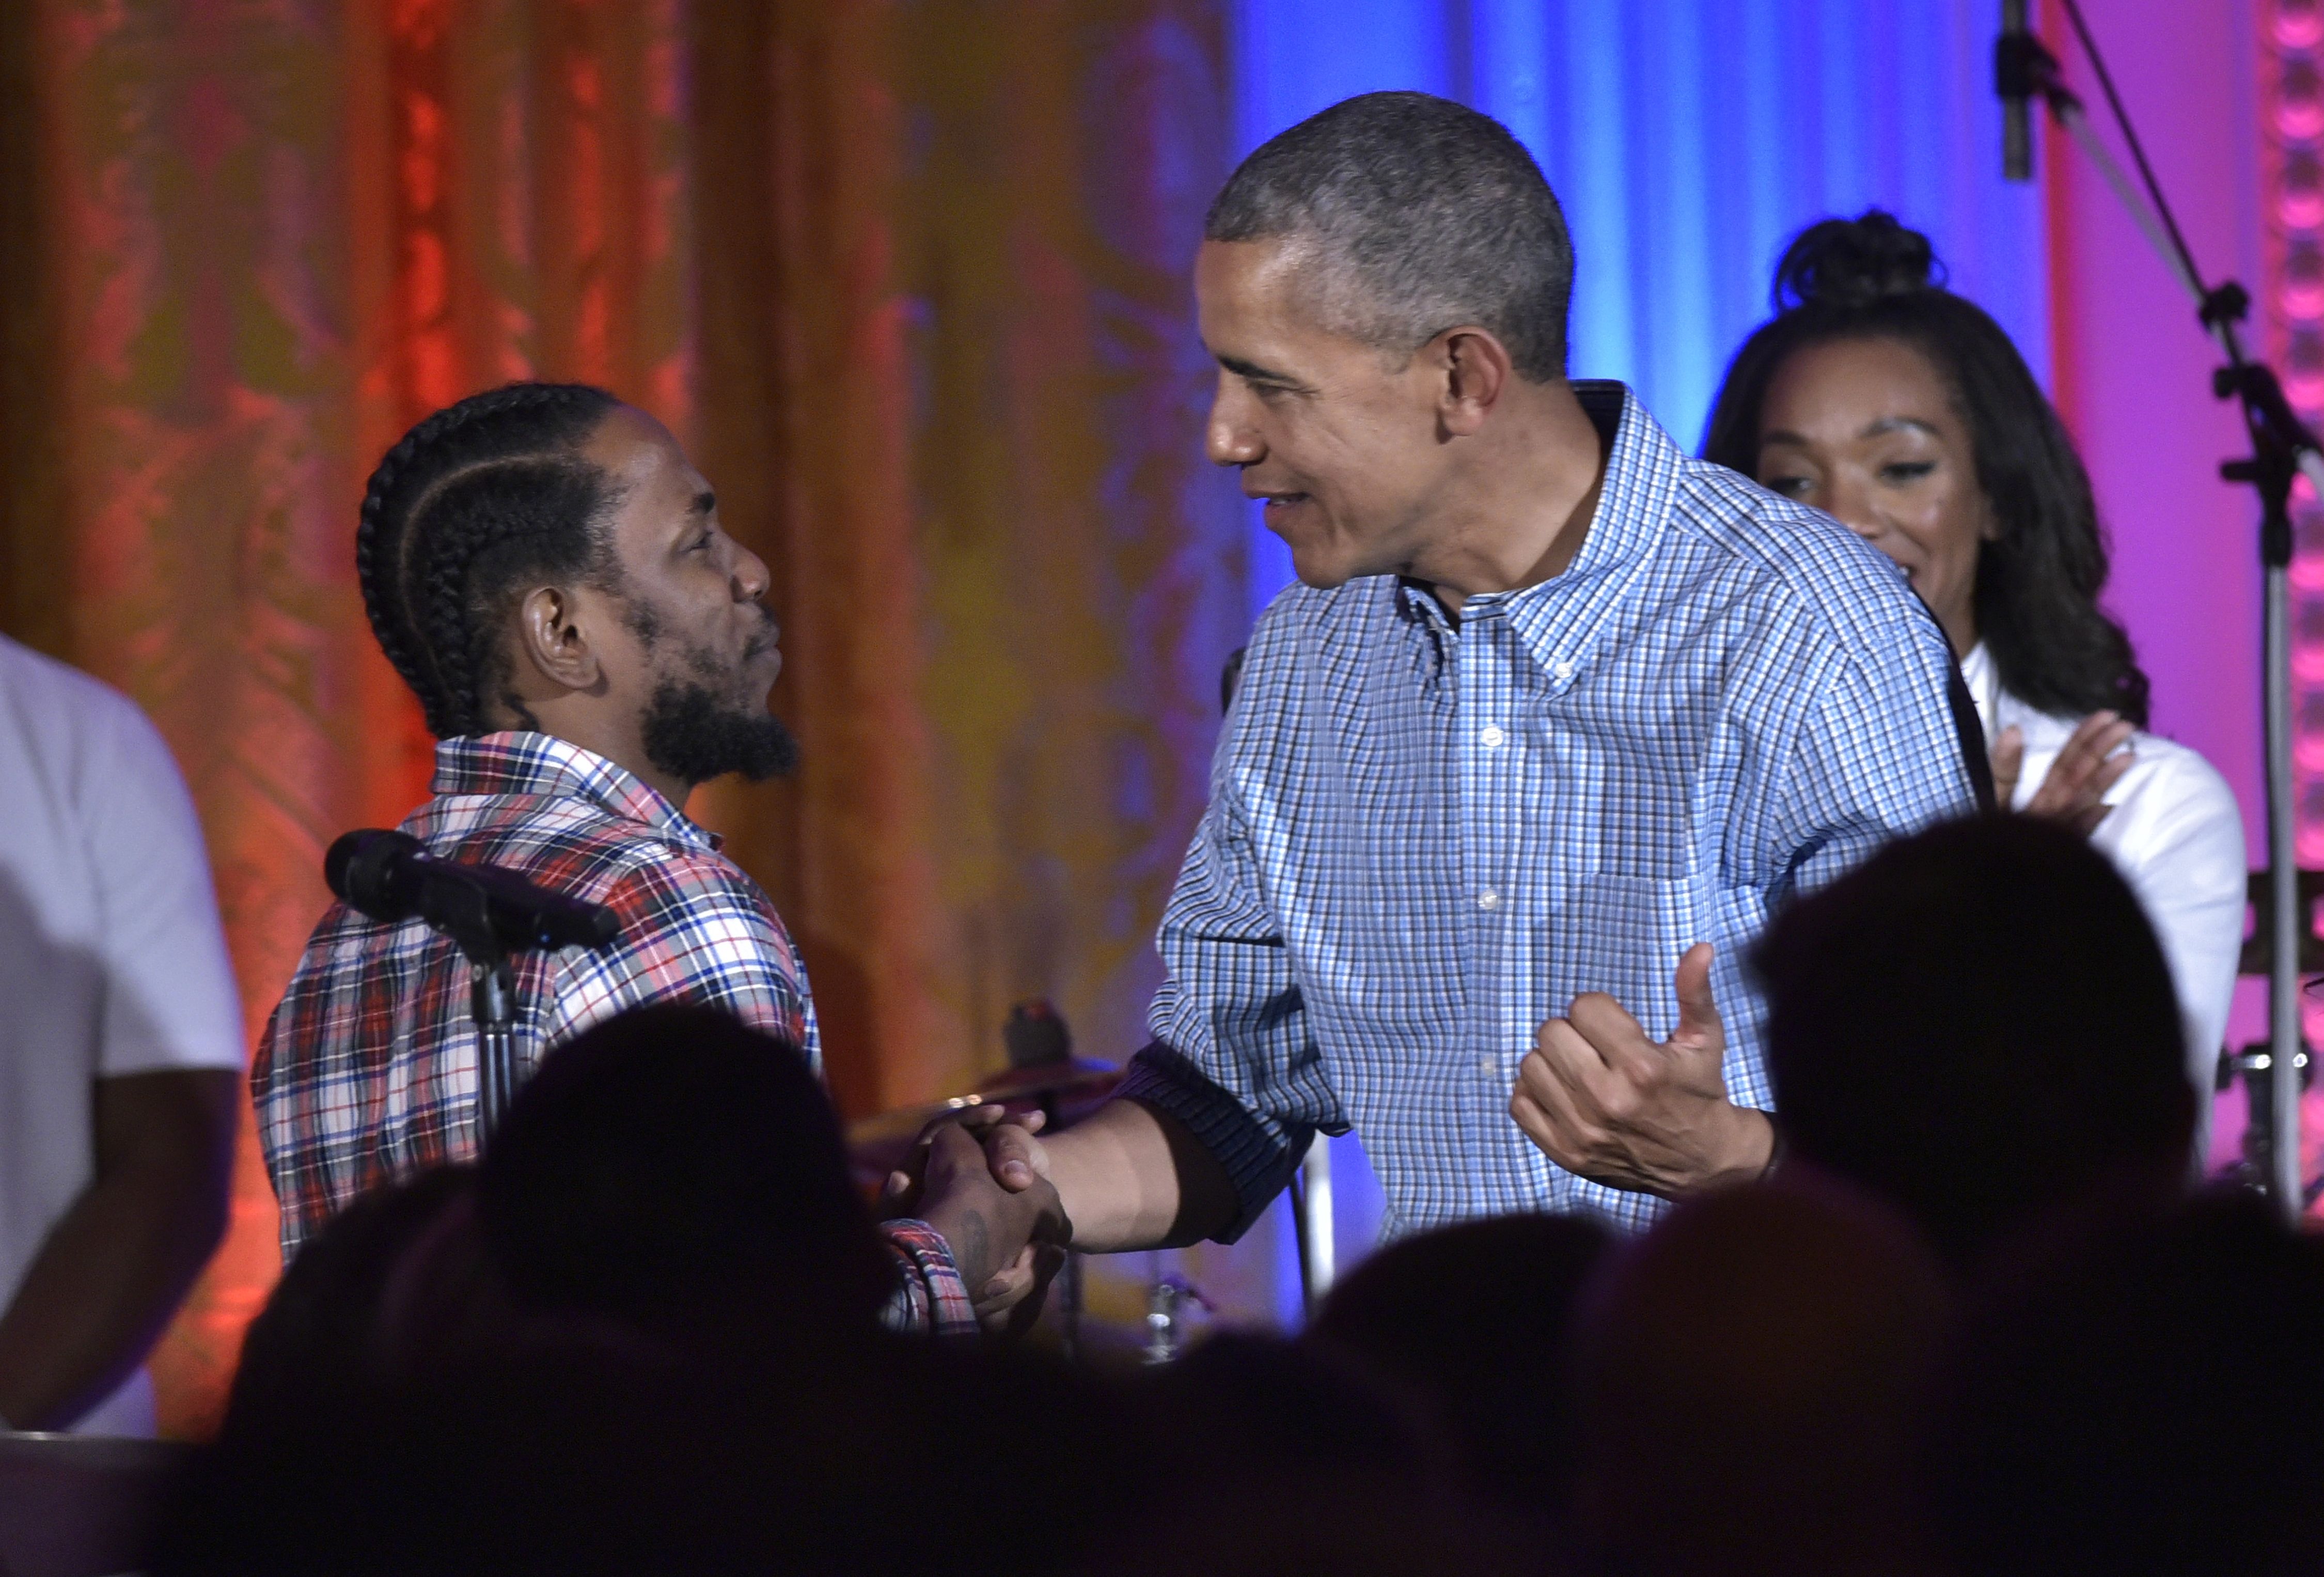 US President Barack Obama shakes hands with peformer Kendrick Lamar during an Independence Day Celebration for military members and administration staff on July 4, 2016 in the East Room of the White House in Washington, DC. (Mandel Ngan—Getty Images)